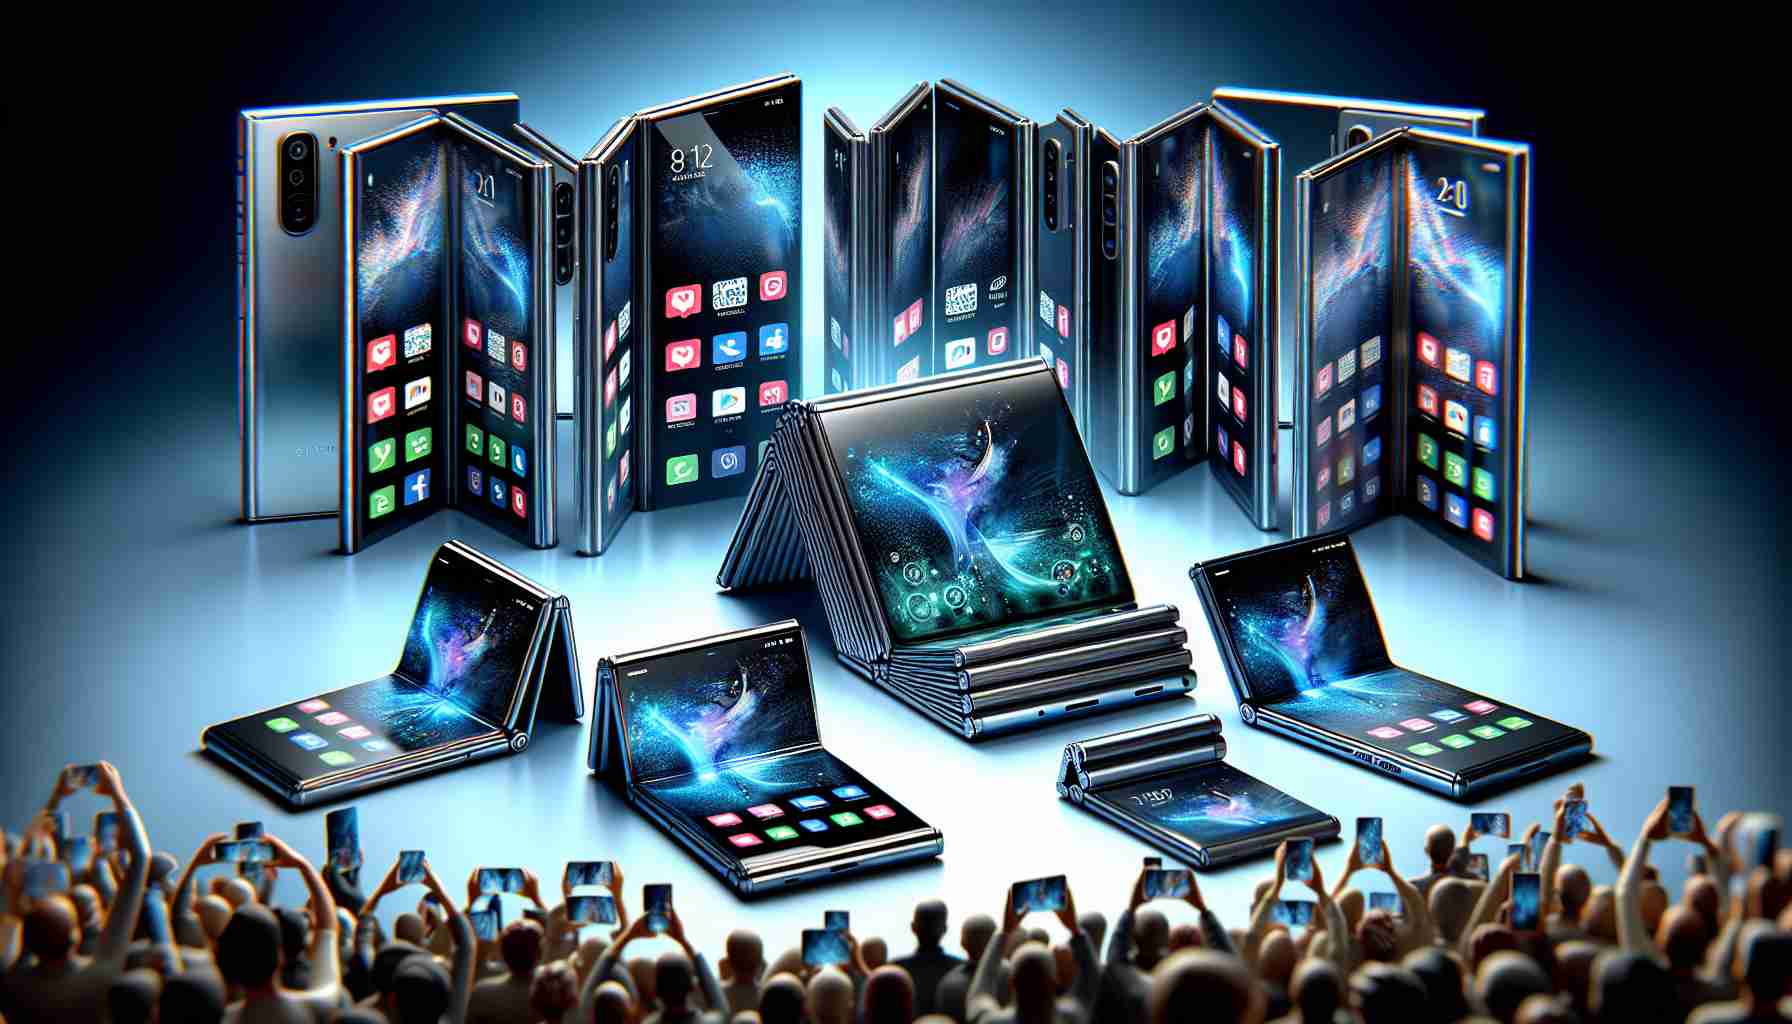 Emergence of New Contenders in the Foldable Smartphone Arena